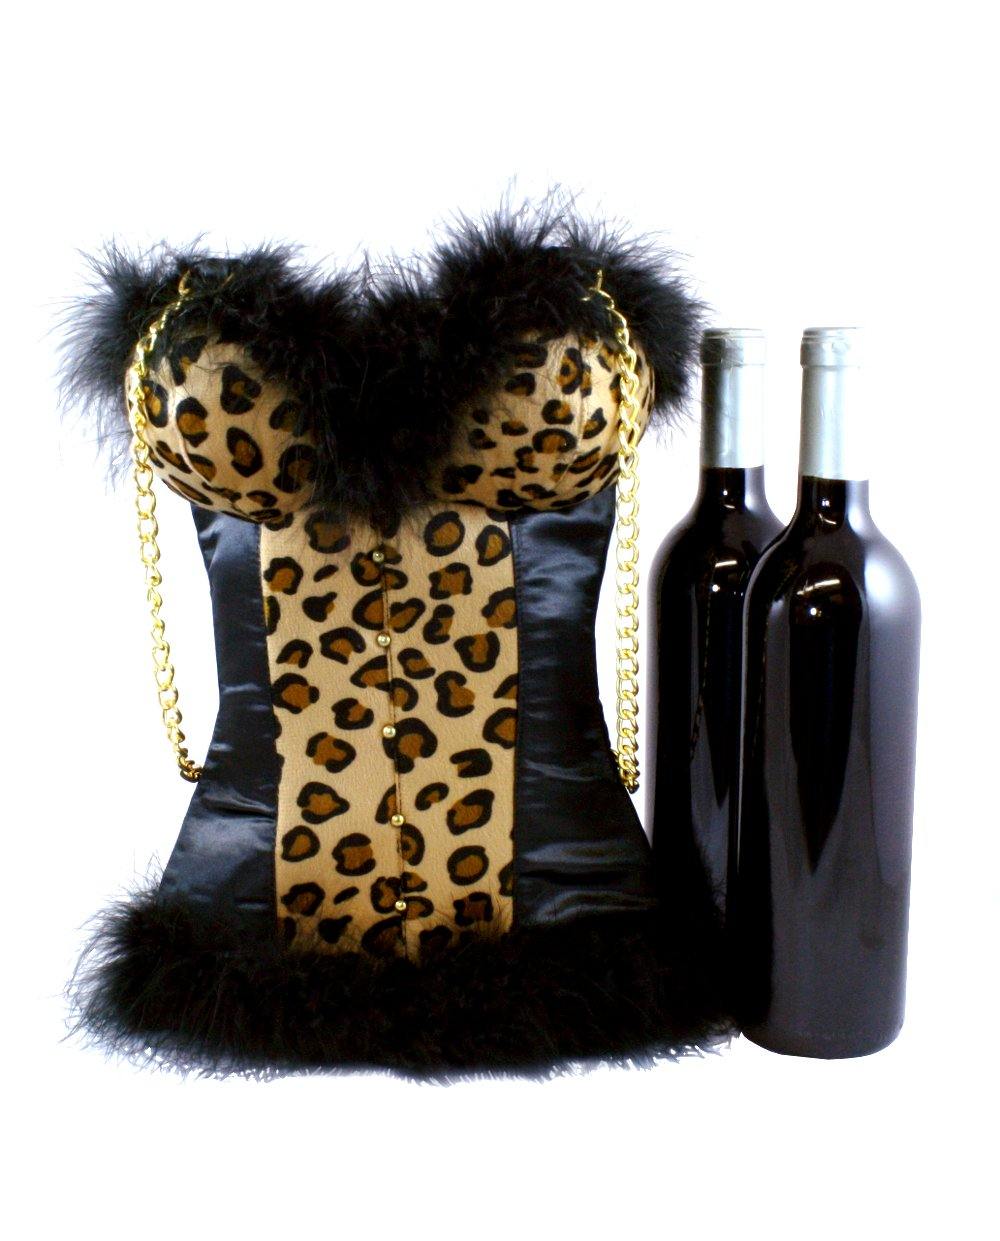 Cheetah Corset Wine Bag Tote by Tipsy Totes. Leopard Print Wine Carrier 